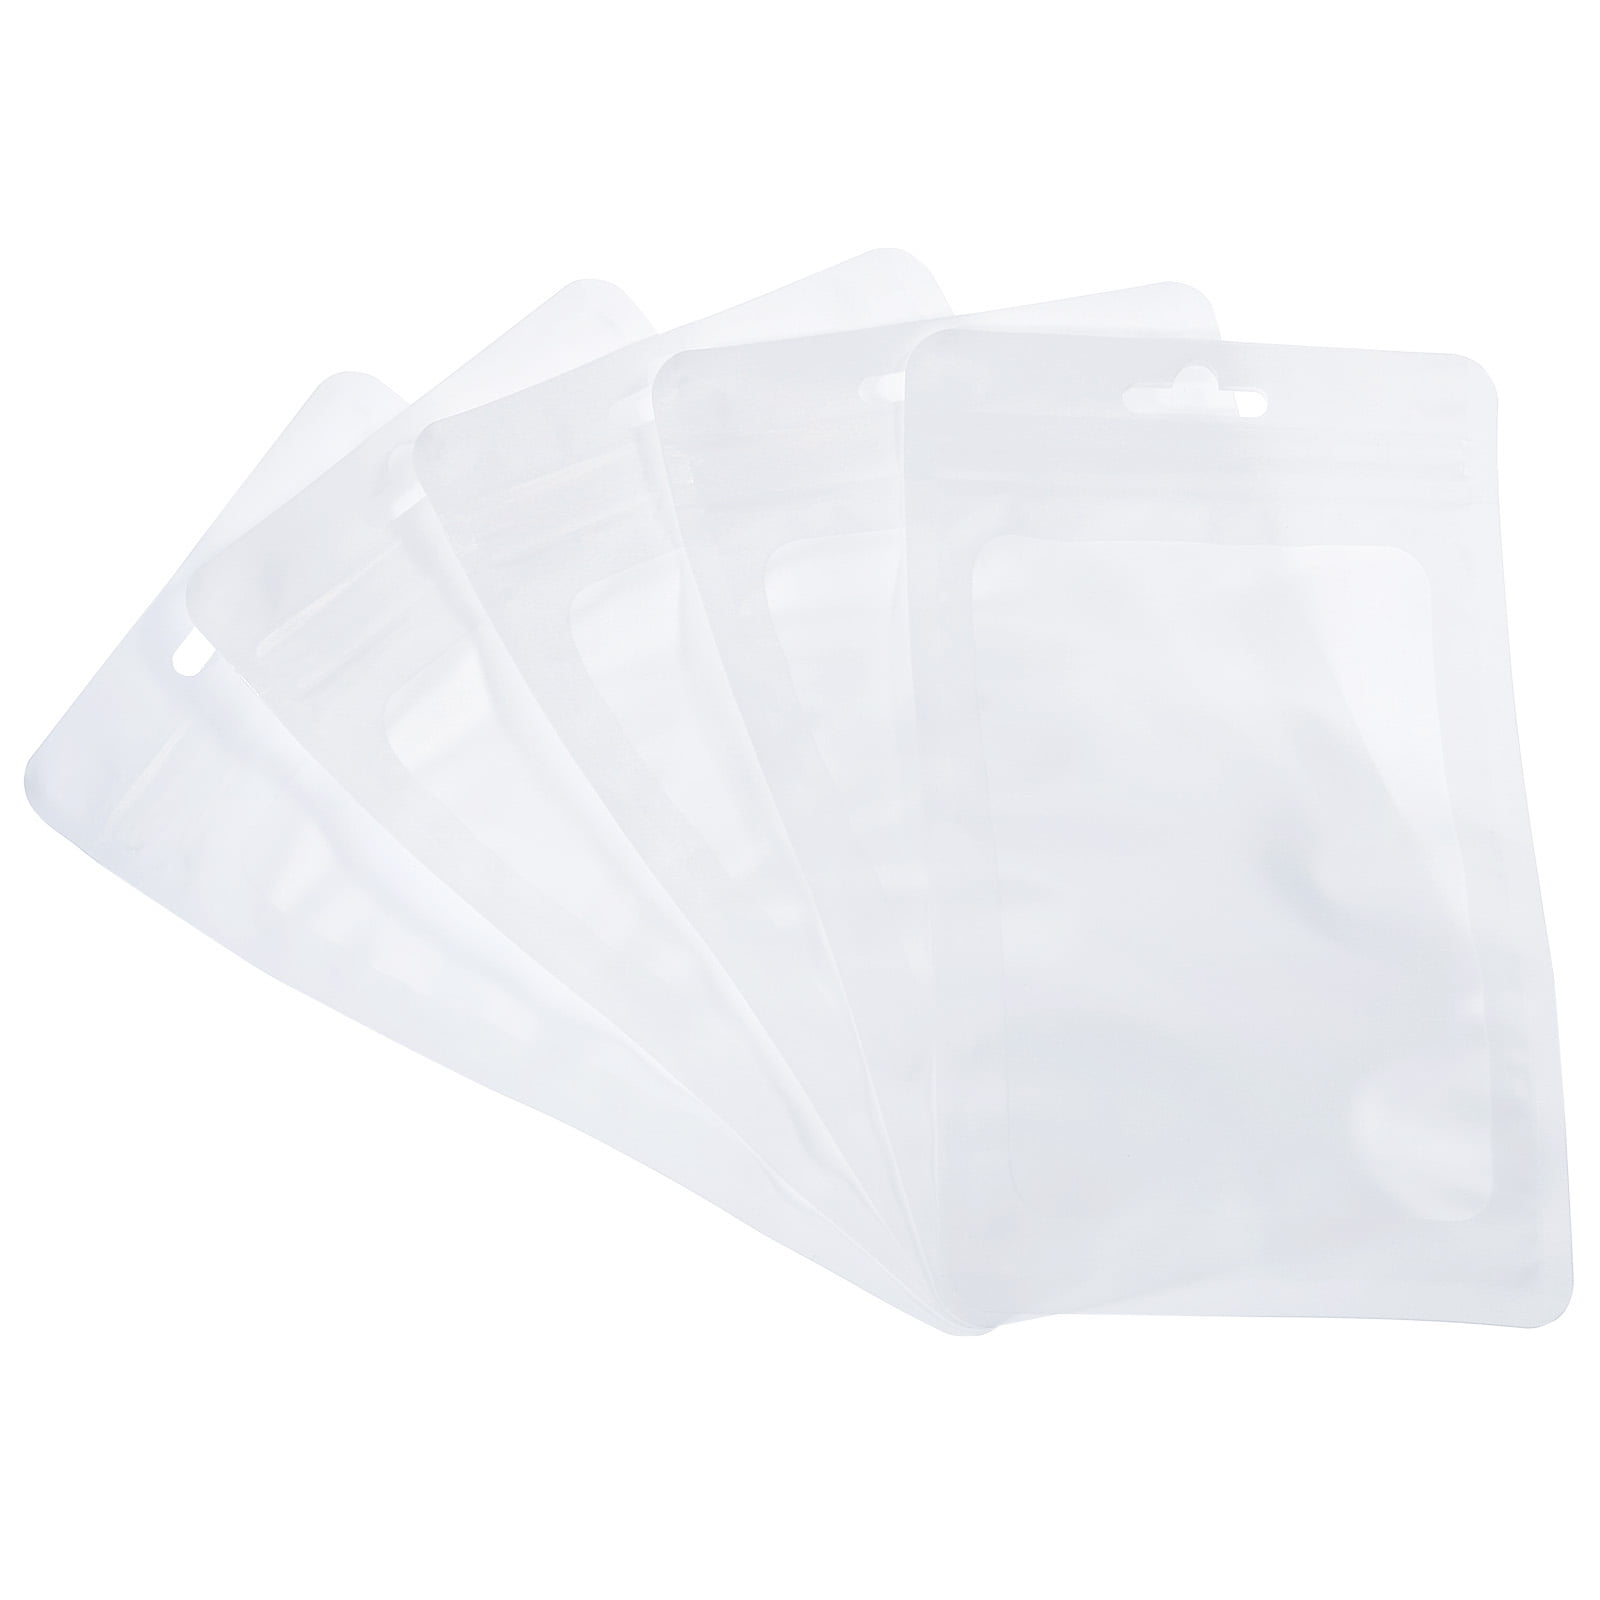 PABCK 100 Pack - Multi Sizes Clear Resealable Zipper Bags Anti-Oxdatio